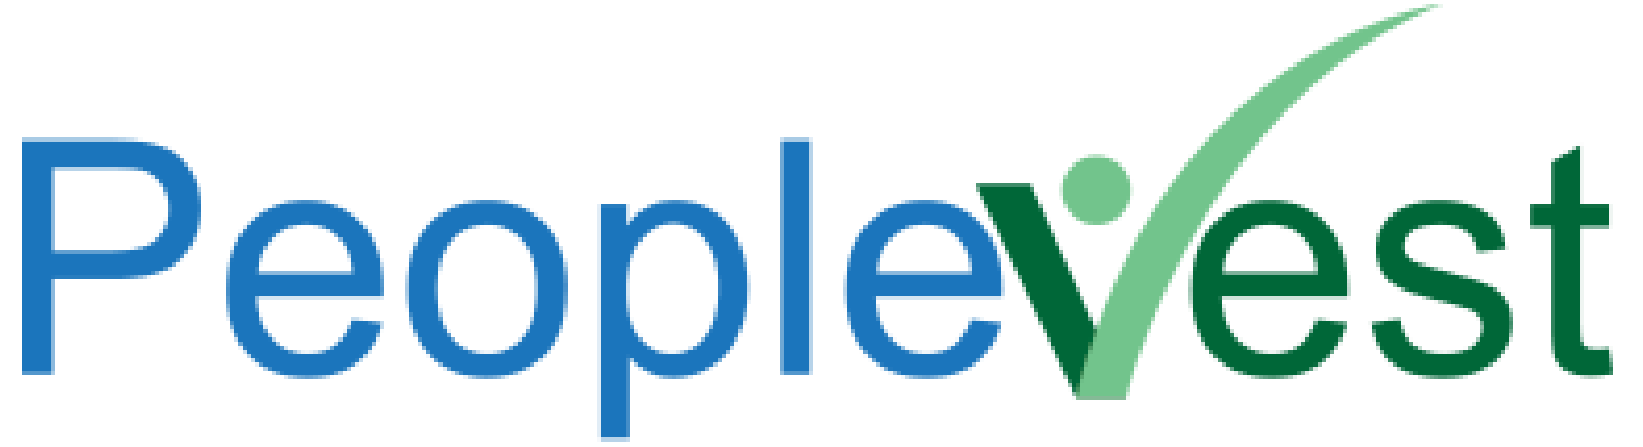 A blue and green logo for people vest